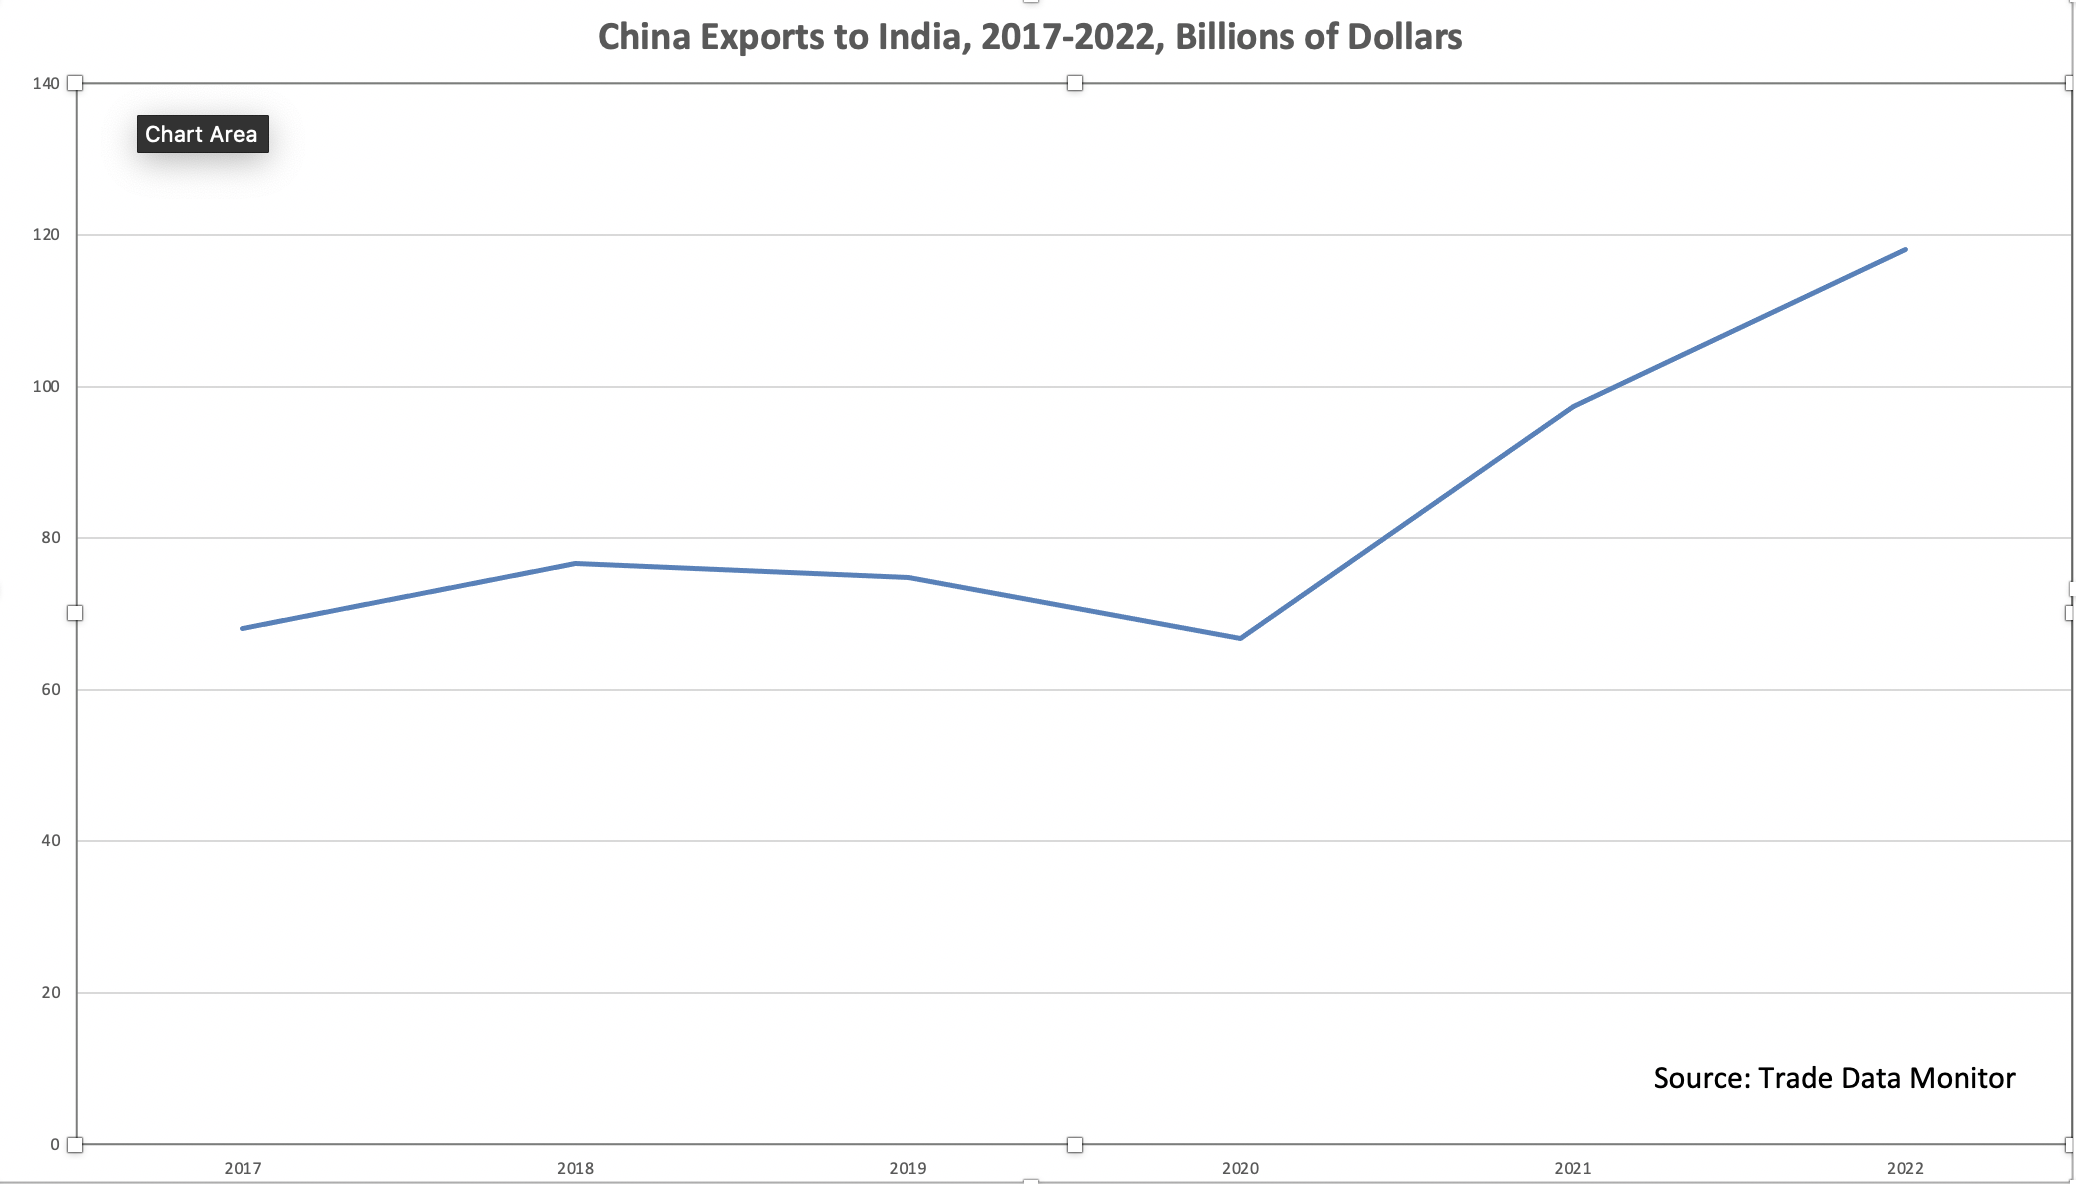 India is Bright Spot in Slumping Trade Numbers